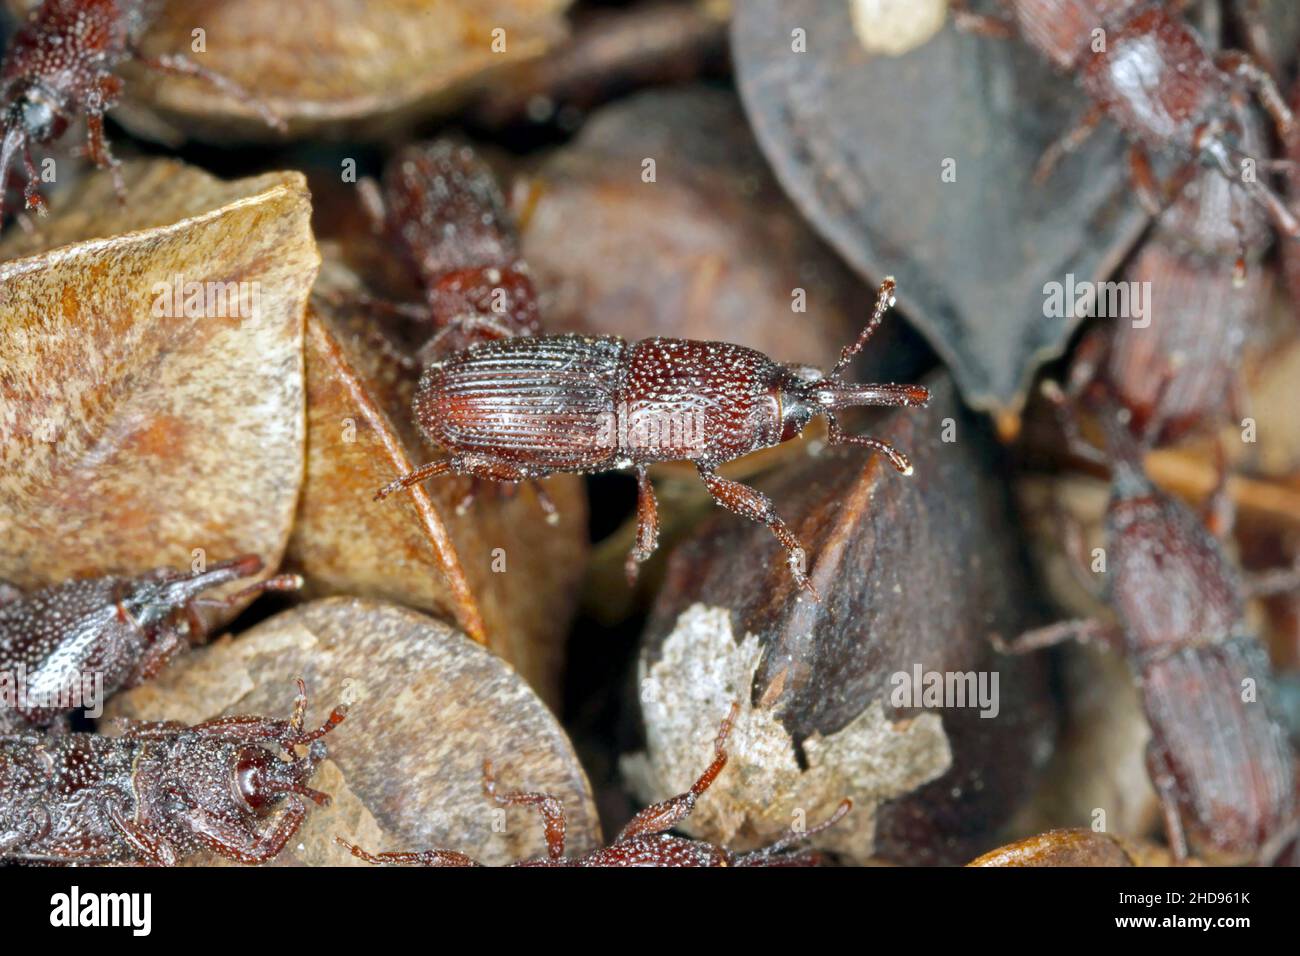 Wheat weevil Sitophilus granarius beetles on buckwheat seeds. High magnification. Stock Photo